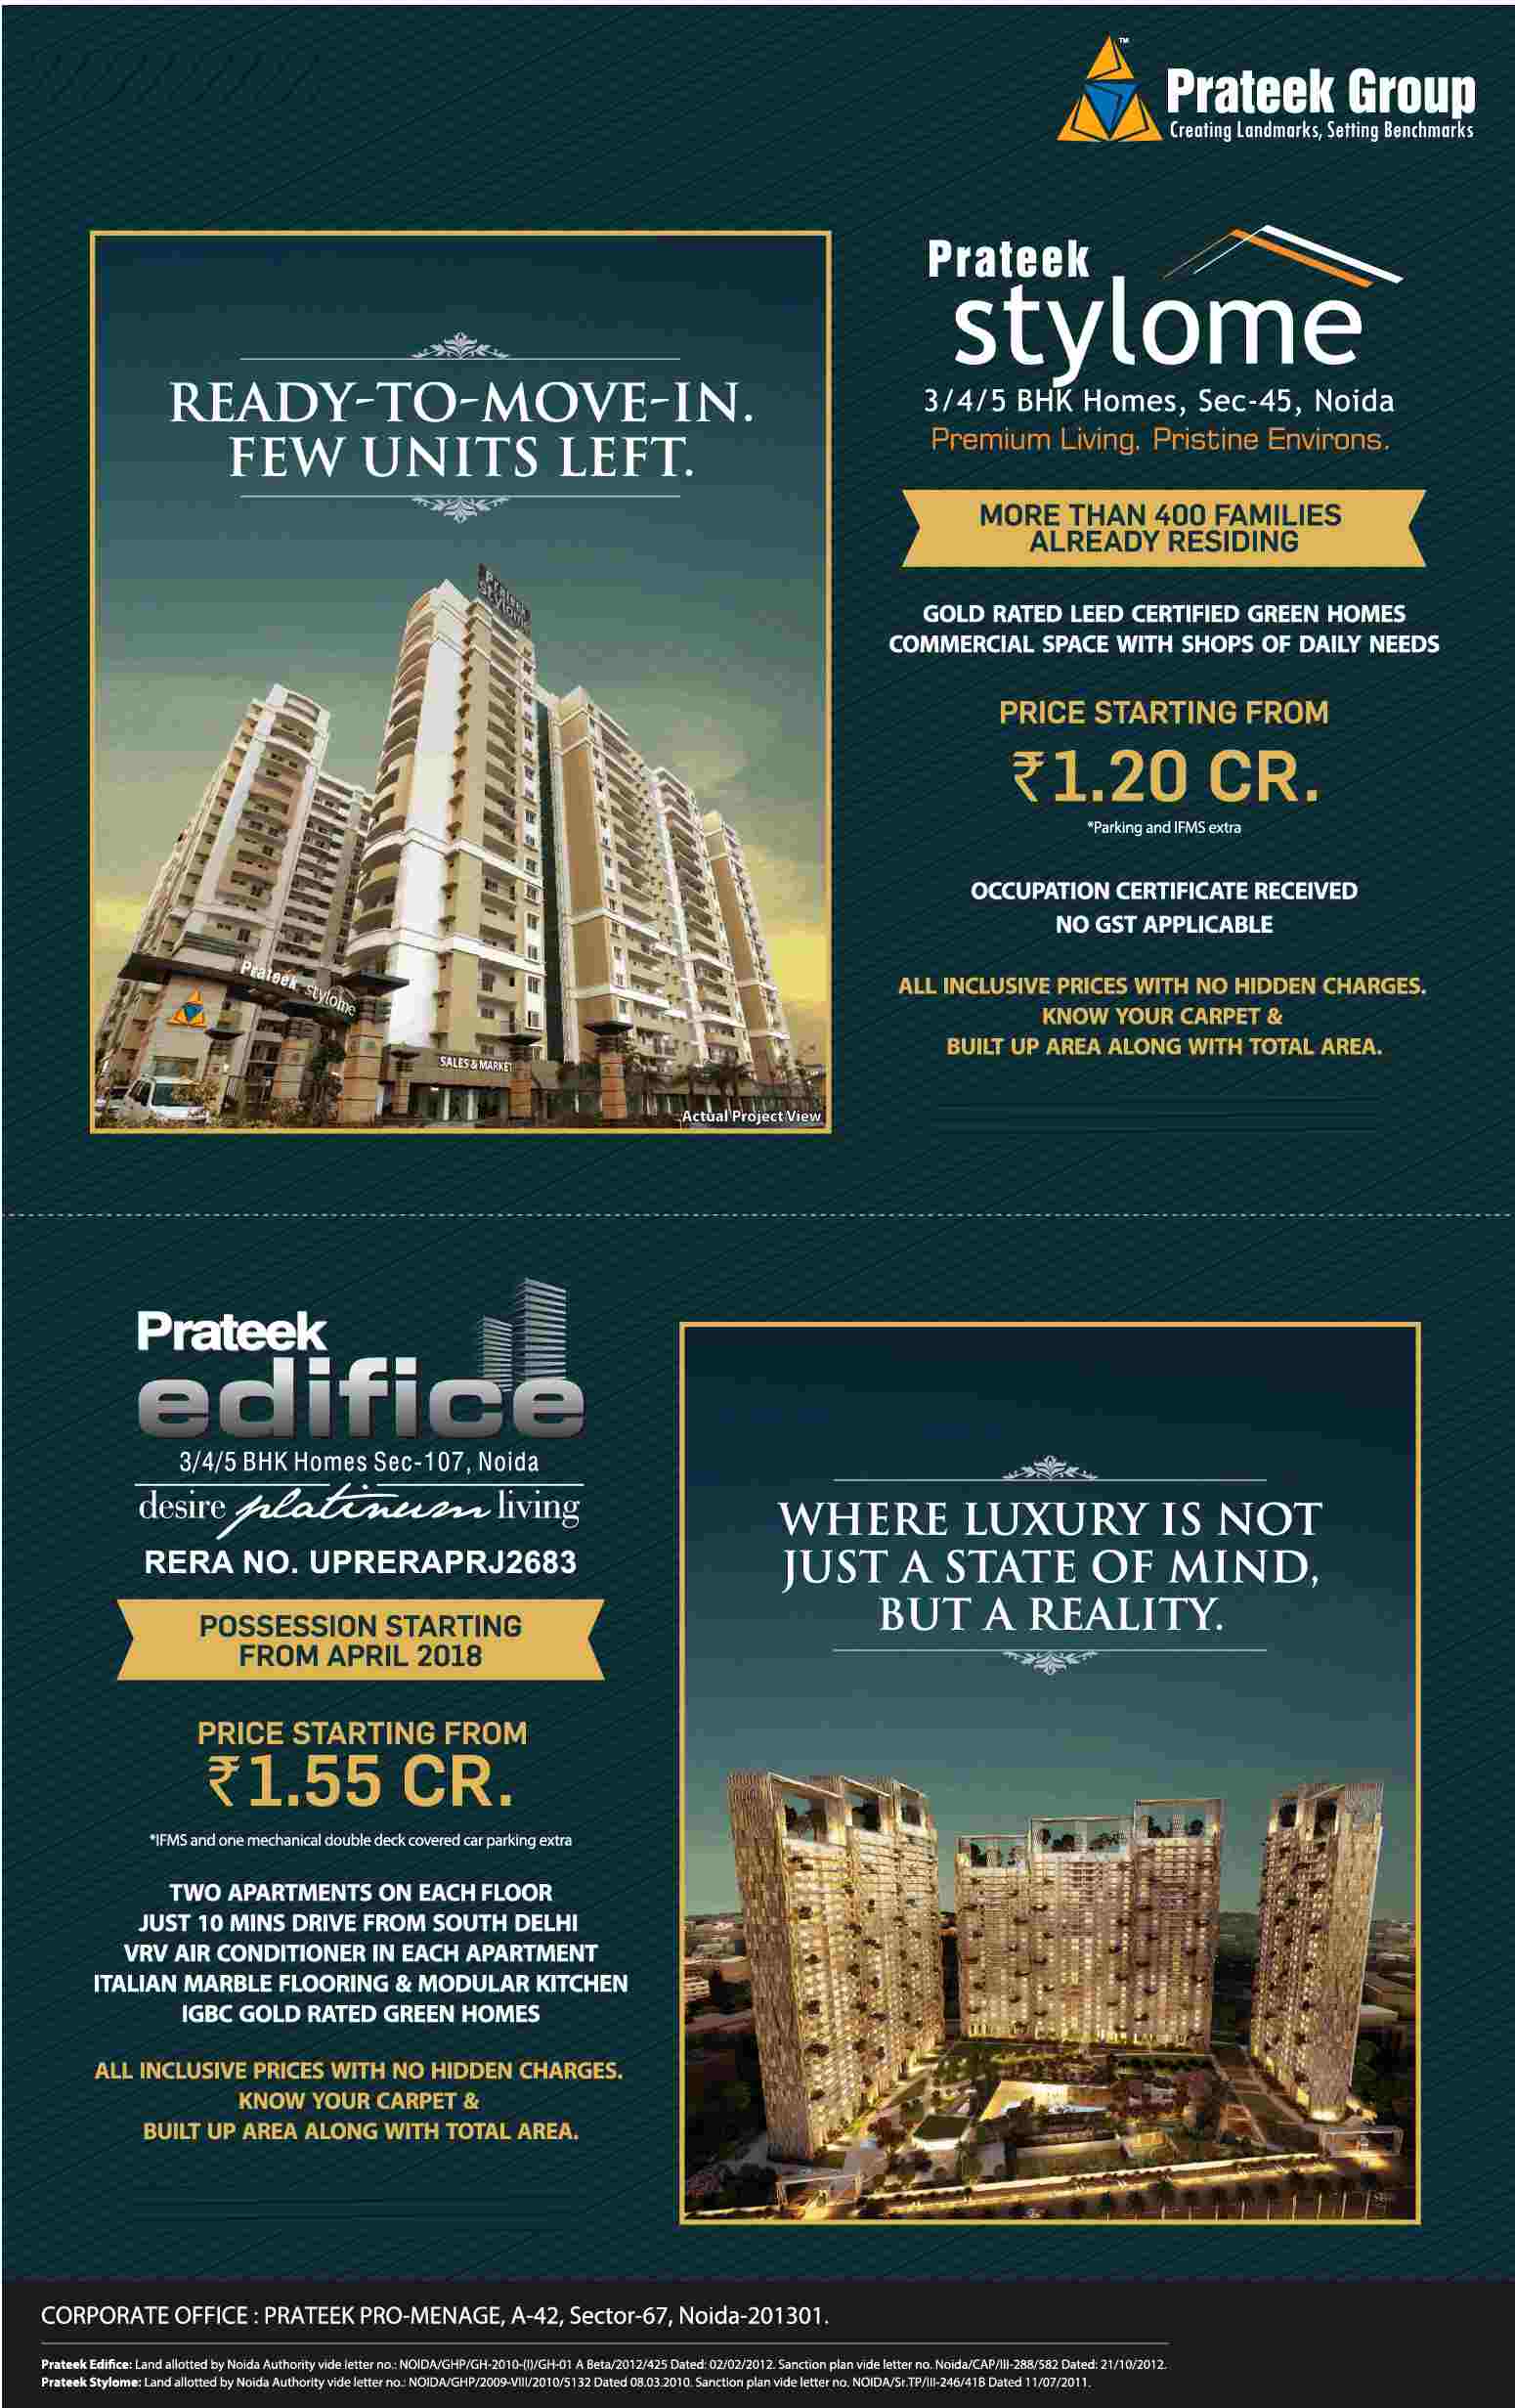 Invest in Prateek Properties & live a luxurious life in Noida